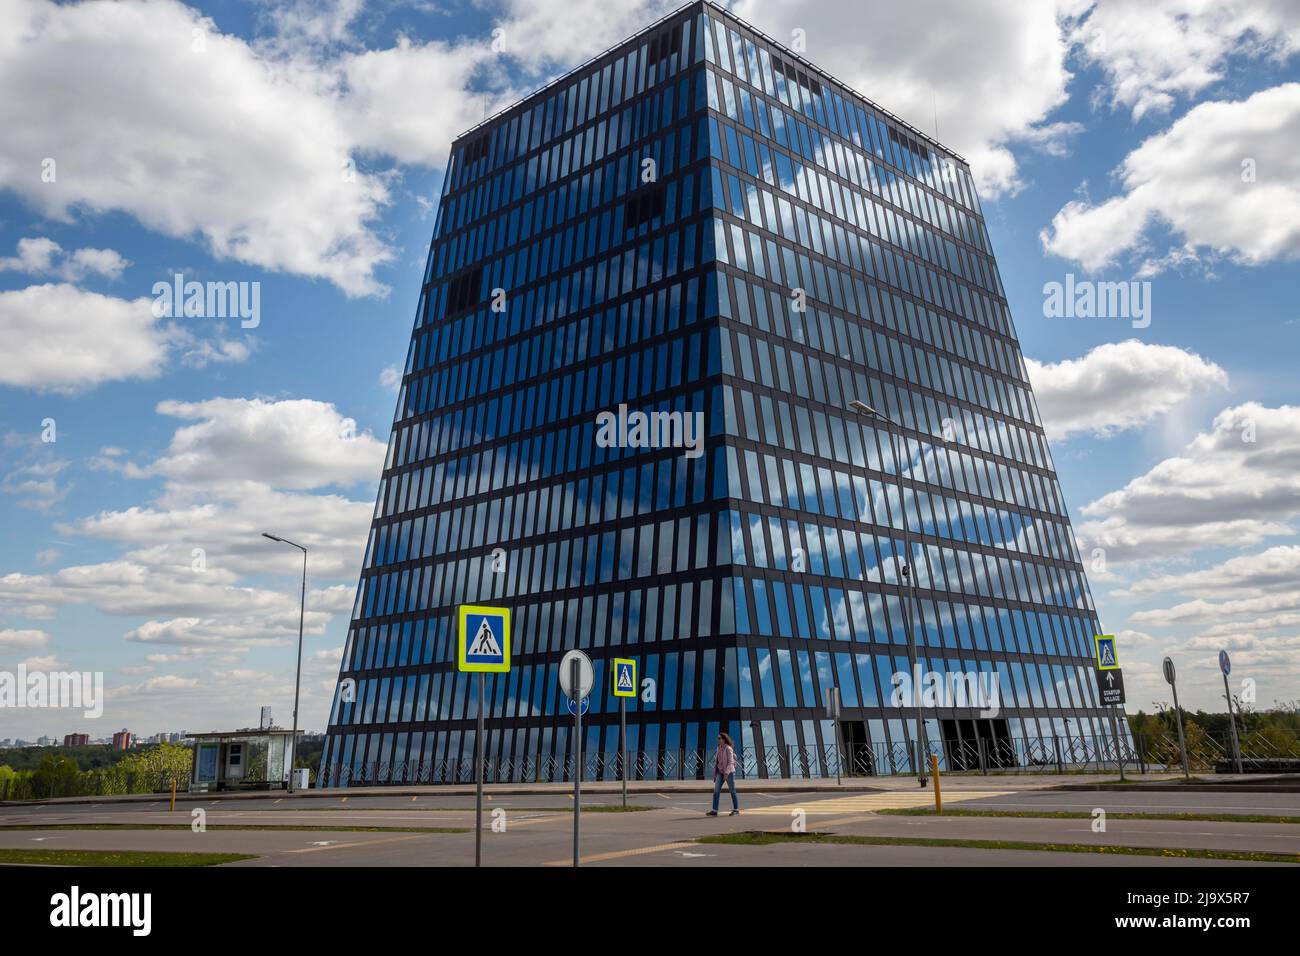 View of a facade of the Hypercube in the Skolkovo Technopark and Skolkovo innovation center in Moscow city, Russia Stock Photo